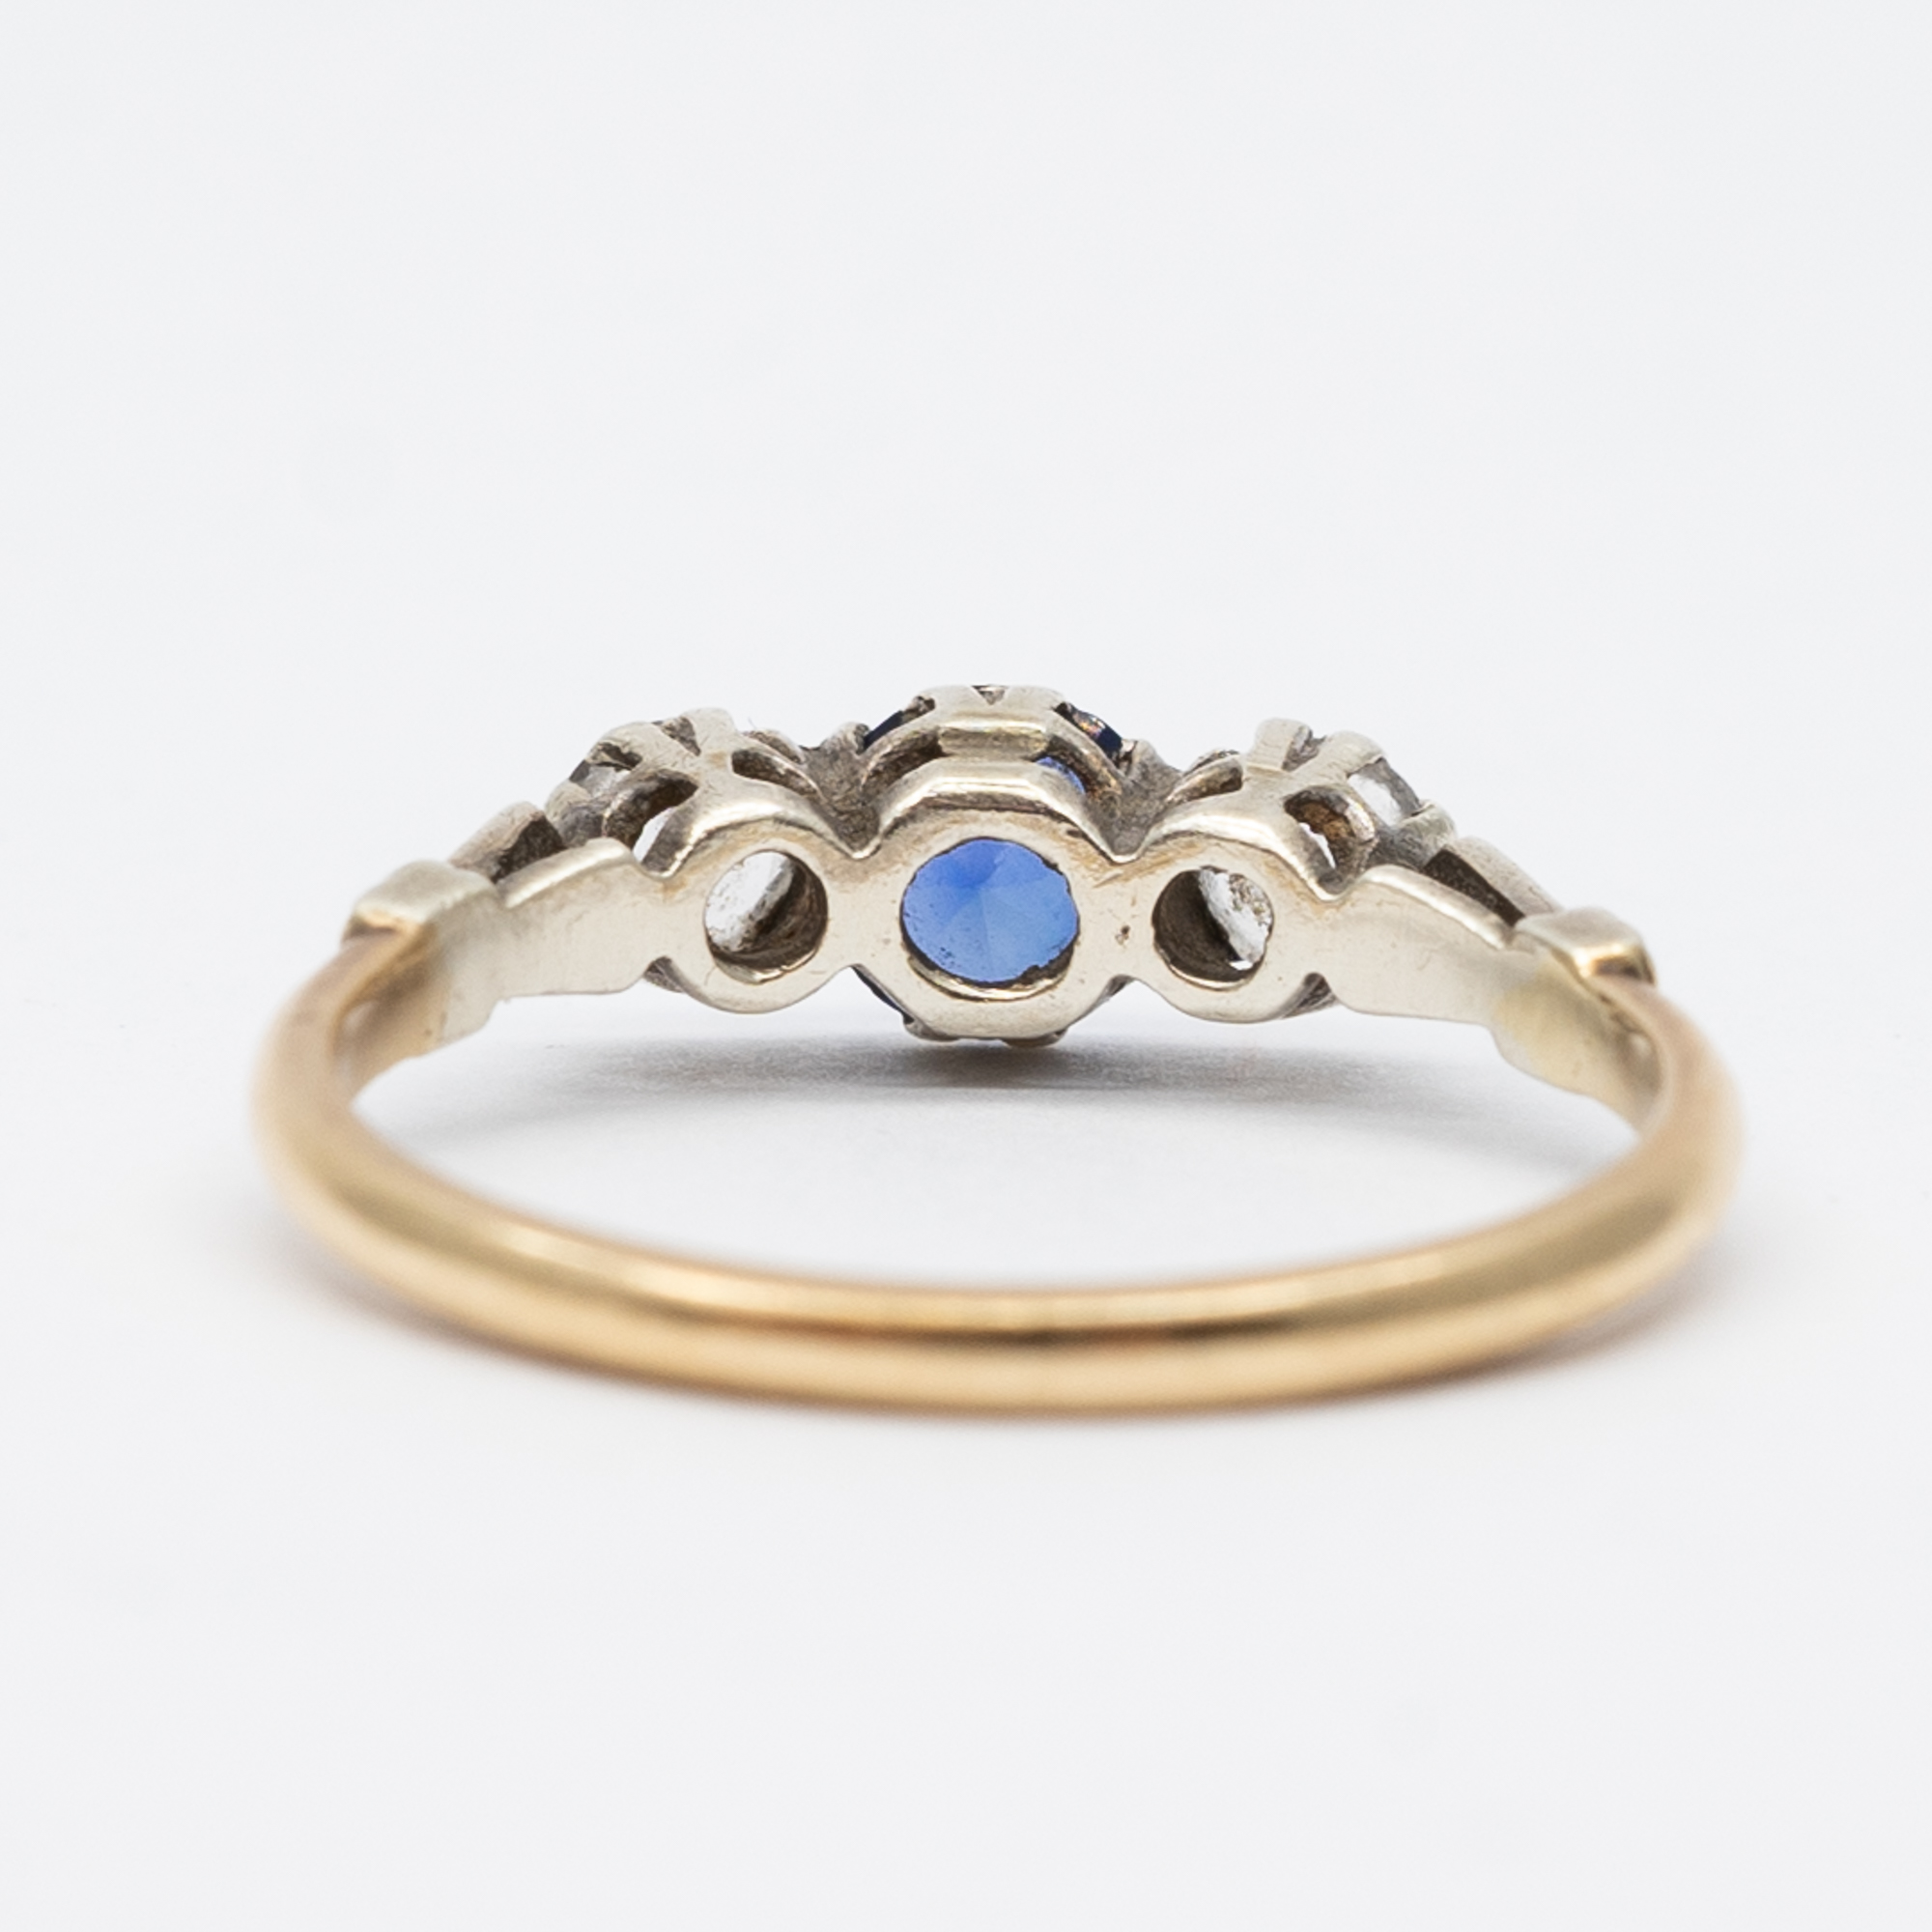 A 9ct yellow gold cz blue stone ring - Image 4 of 6